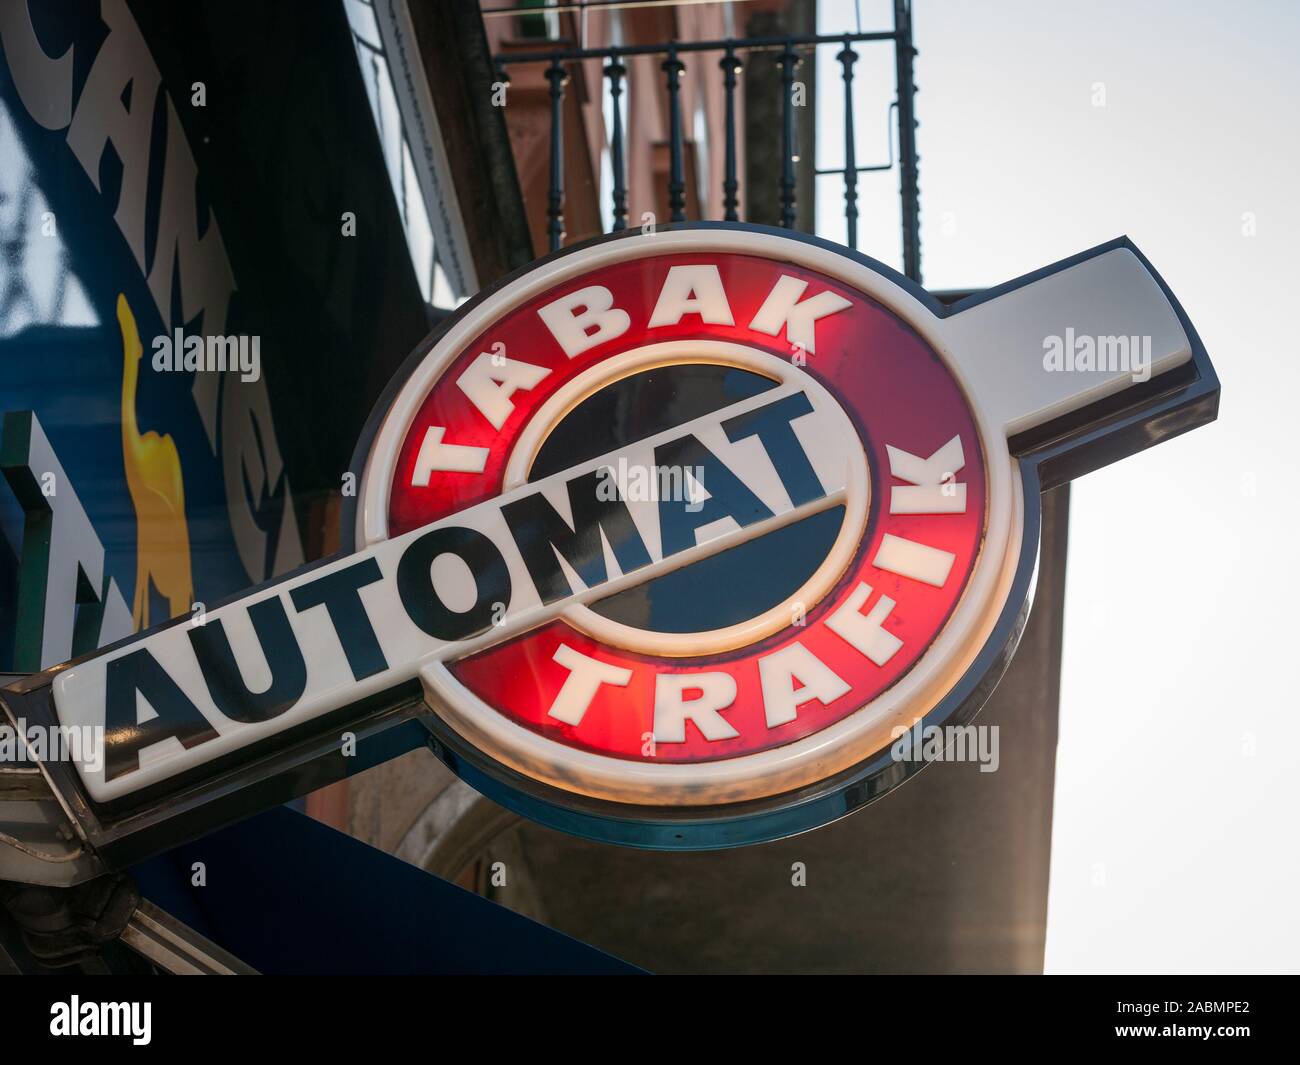 VIENNA, AUSTRIA - NOVEMBER 6, 2019: Austrian tobacconist sign, also called tabaktrafik automat, in the city center of Vienna. It is a typical design t Stock Photo